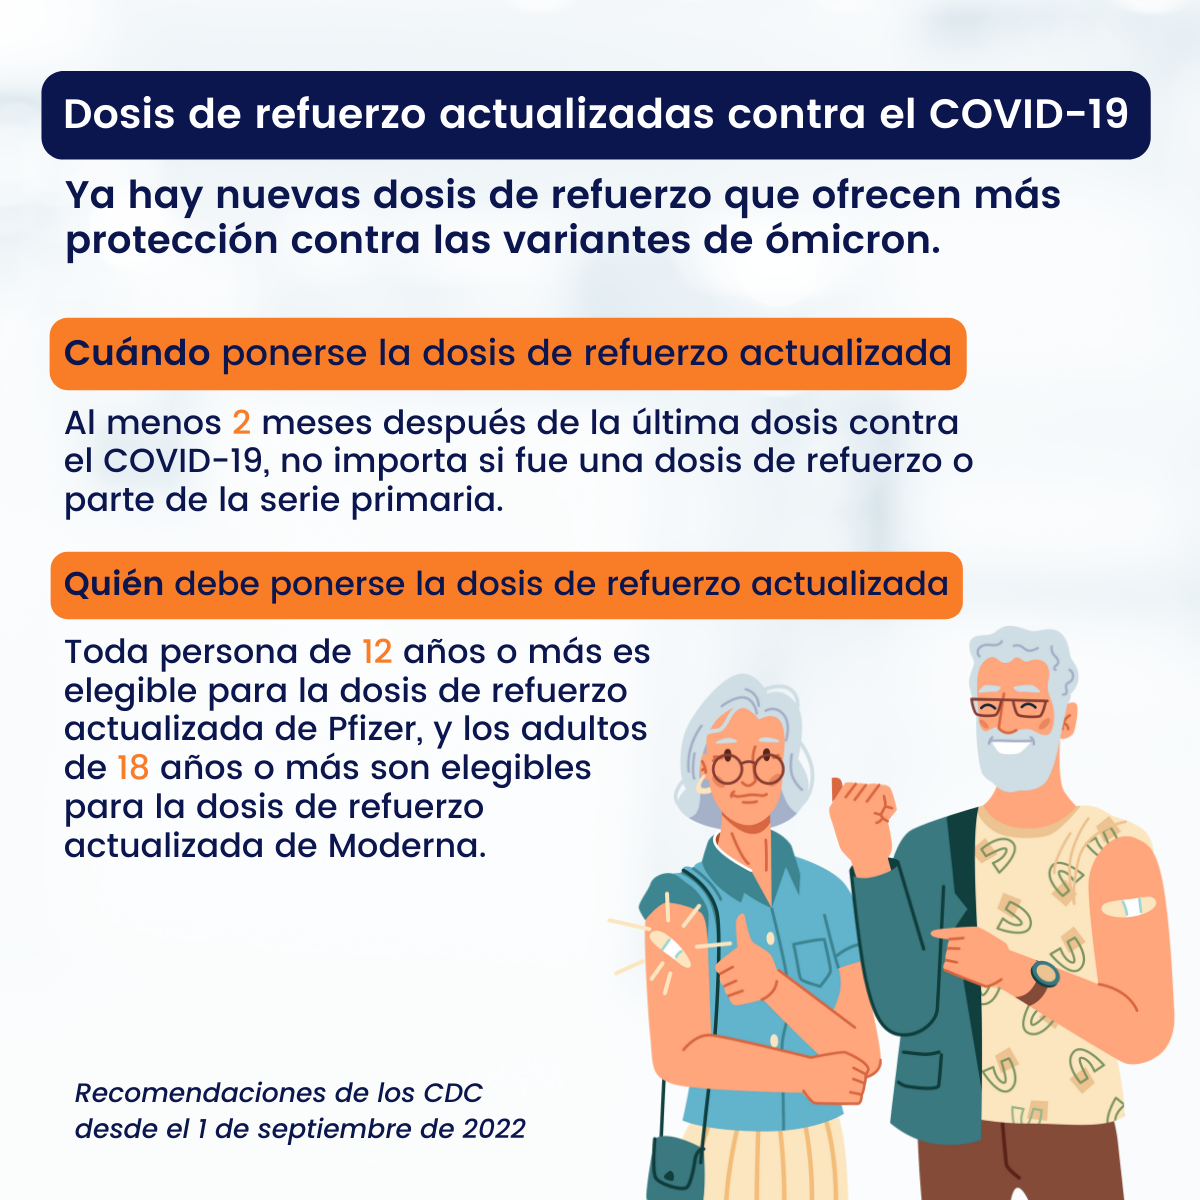 Square image with white background and navy, orange and white text communicates, in Spanish, information about updated COVID-19 booster doses. CDC recommendations as of 09/01/2022 is in the bottom left corner. White older male and female with white and gray hair are smiling and pointing to a band aid on on their upper arm where they received their booster.